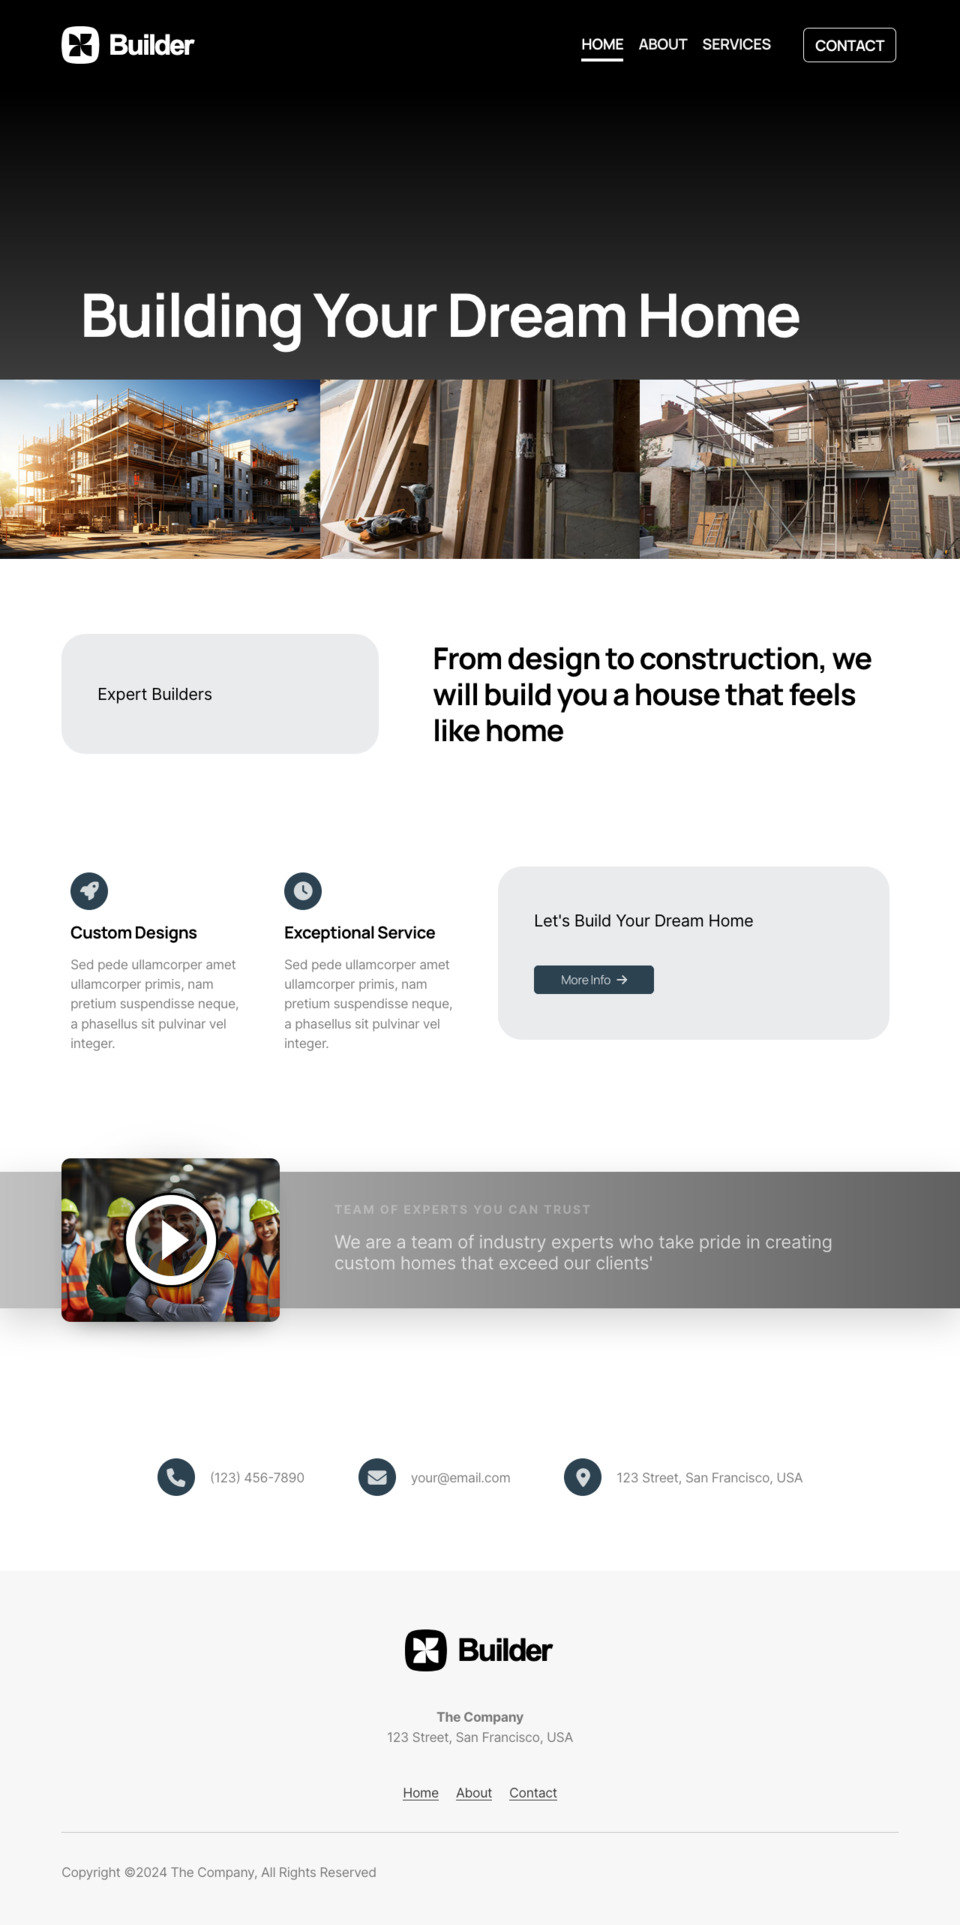 Builder Website Template - Ideal for home builders, construction companies, architects, and general contractors looking to create a professional online presence.